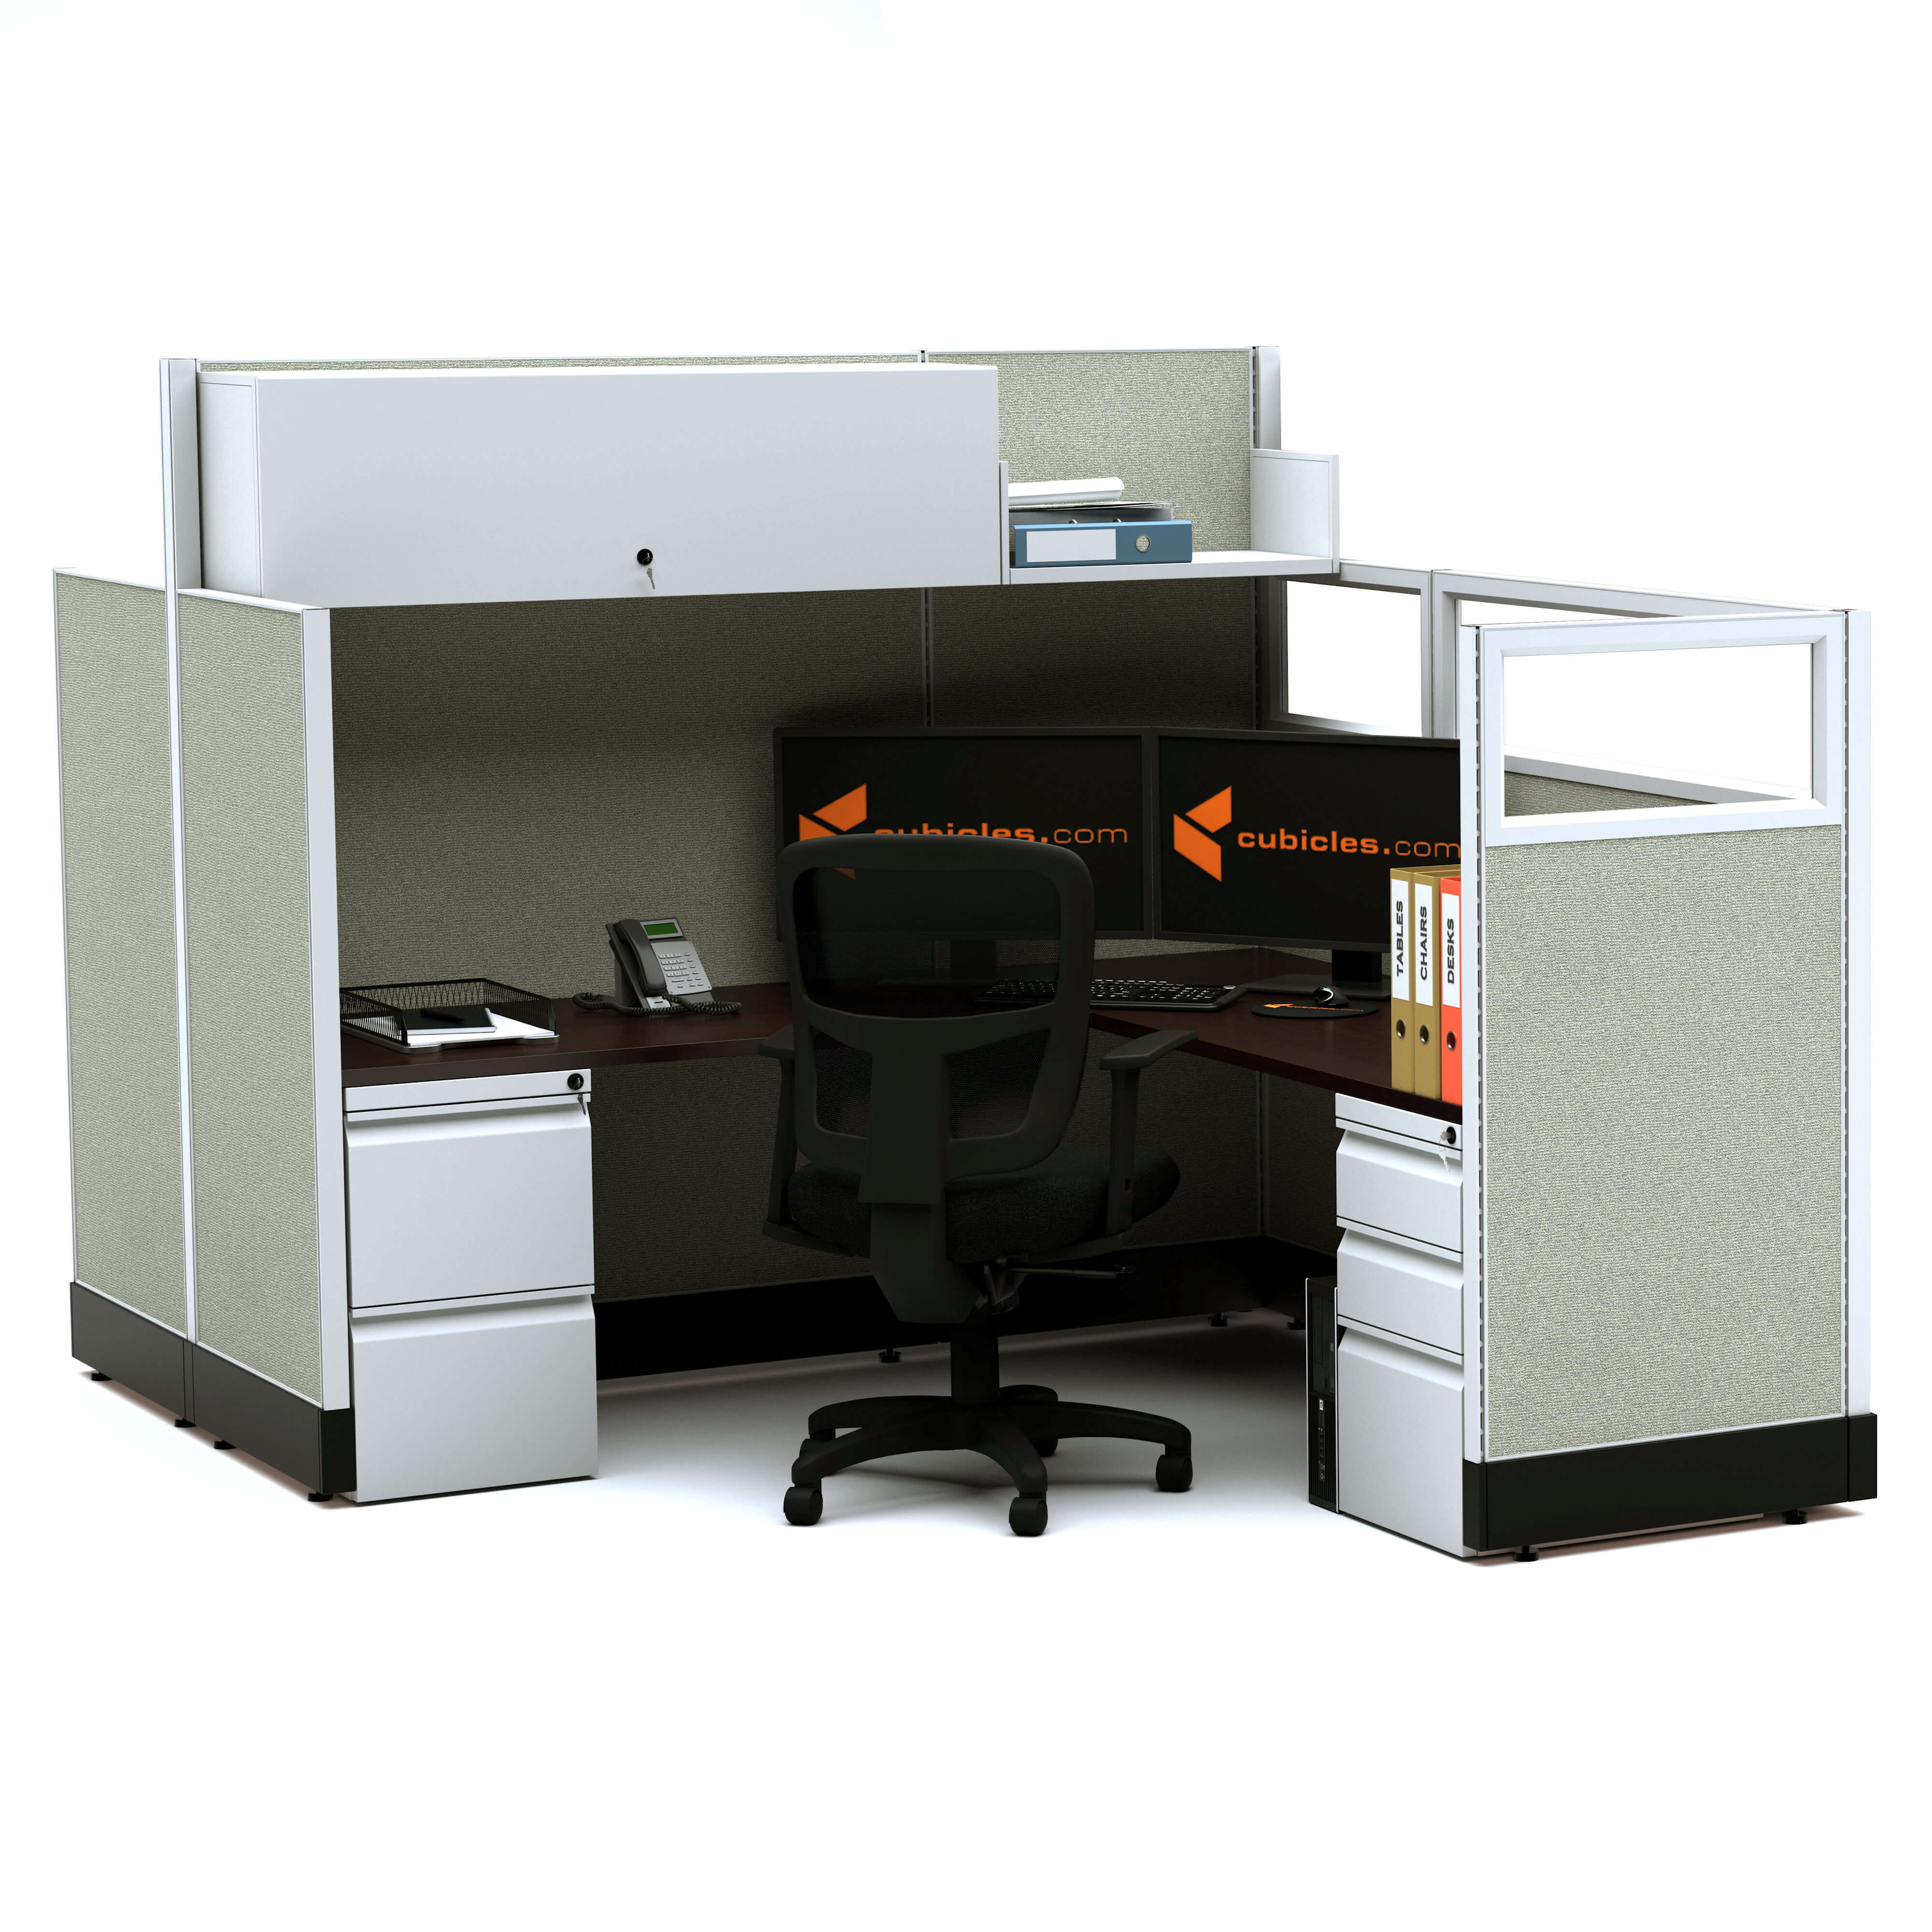 modular-office-furniture-partial-glass-office-cubicles-53-67h-2pack-cluster-powered.jpg